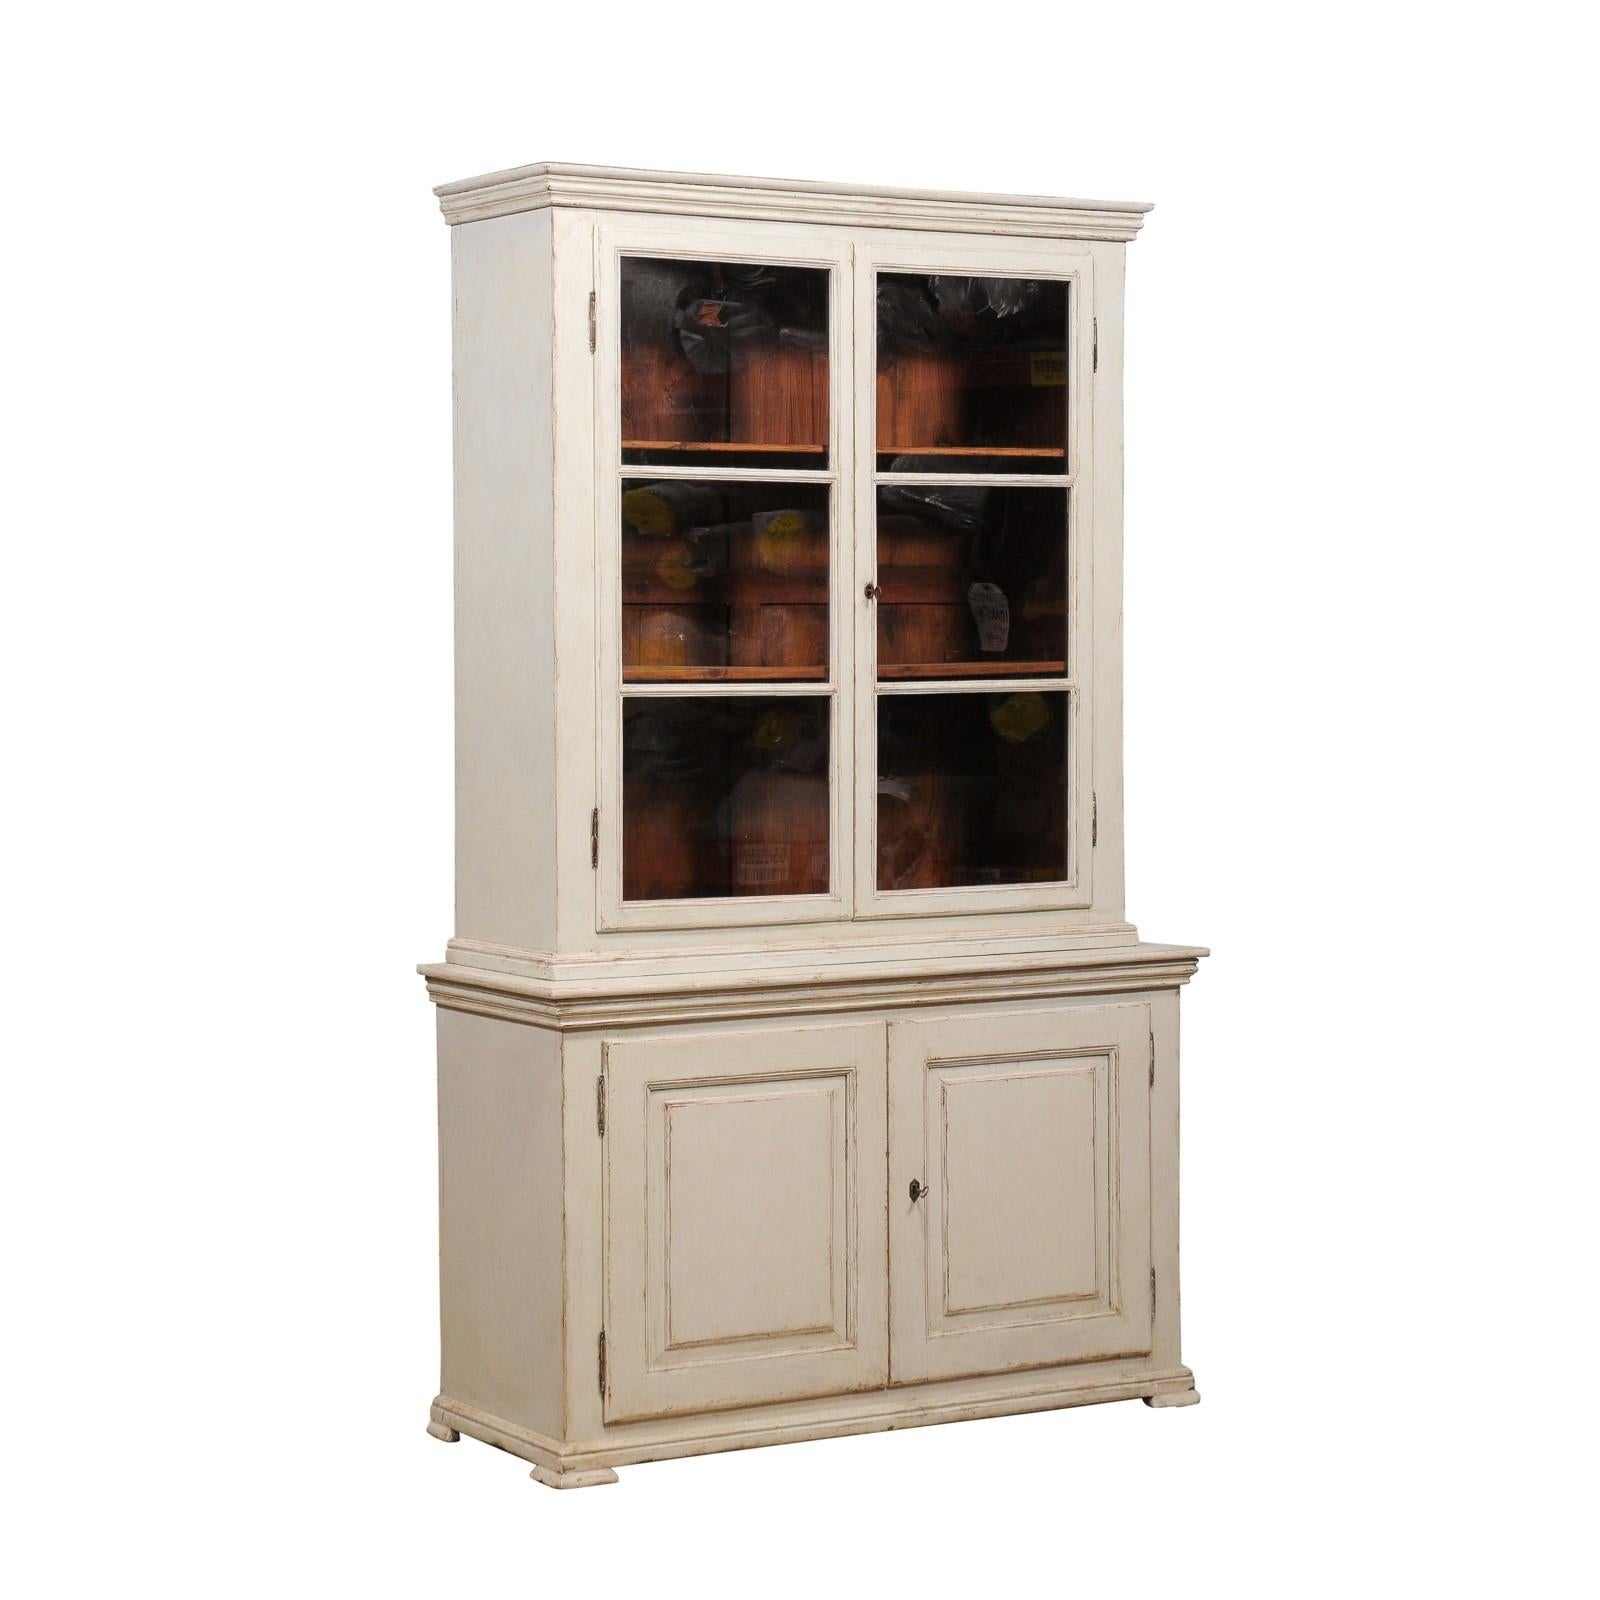 A Swedish two part glass door vitrine cabinet from circa 1850 with gray/beige painted finish and carved panels on the doors. This exquisite Swedish two-part glass door vitrine cabinet, crafted around 1850, effortlessly blends form and function. Its